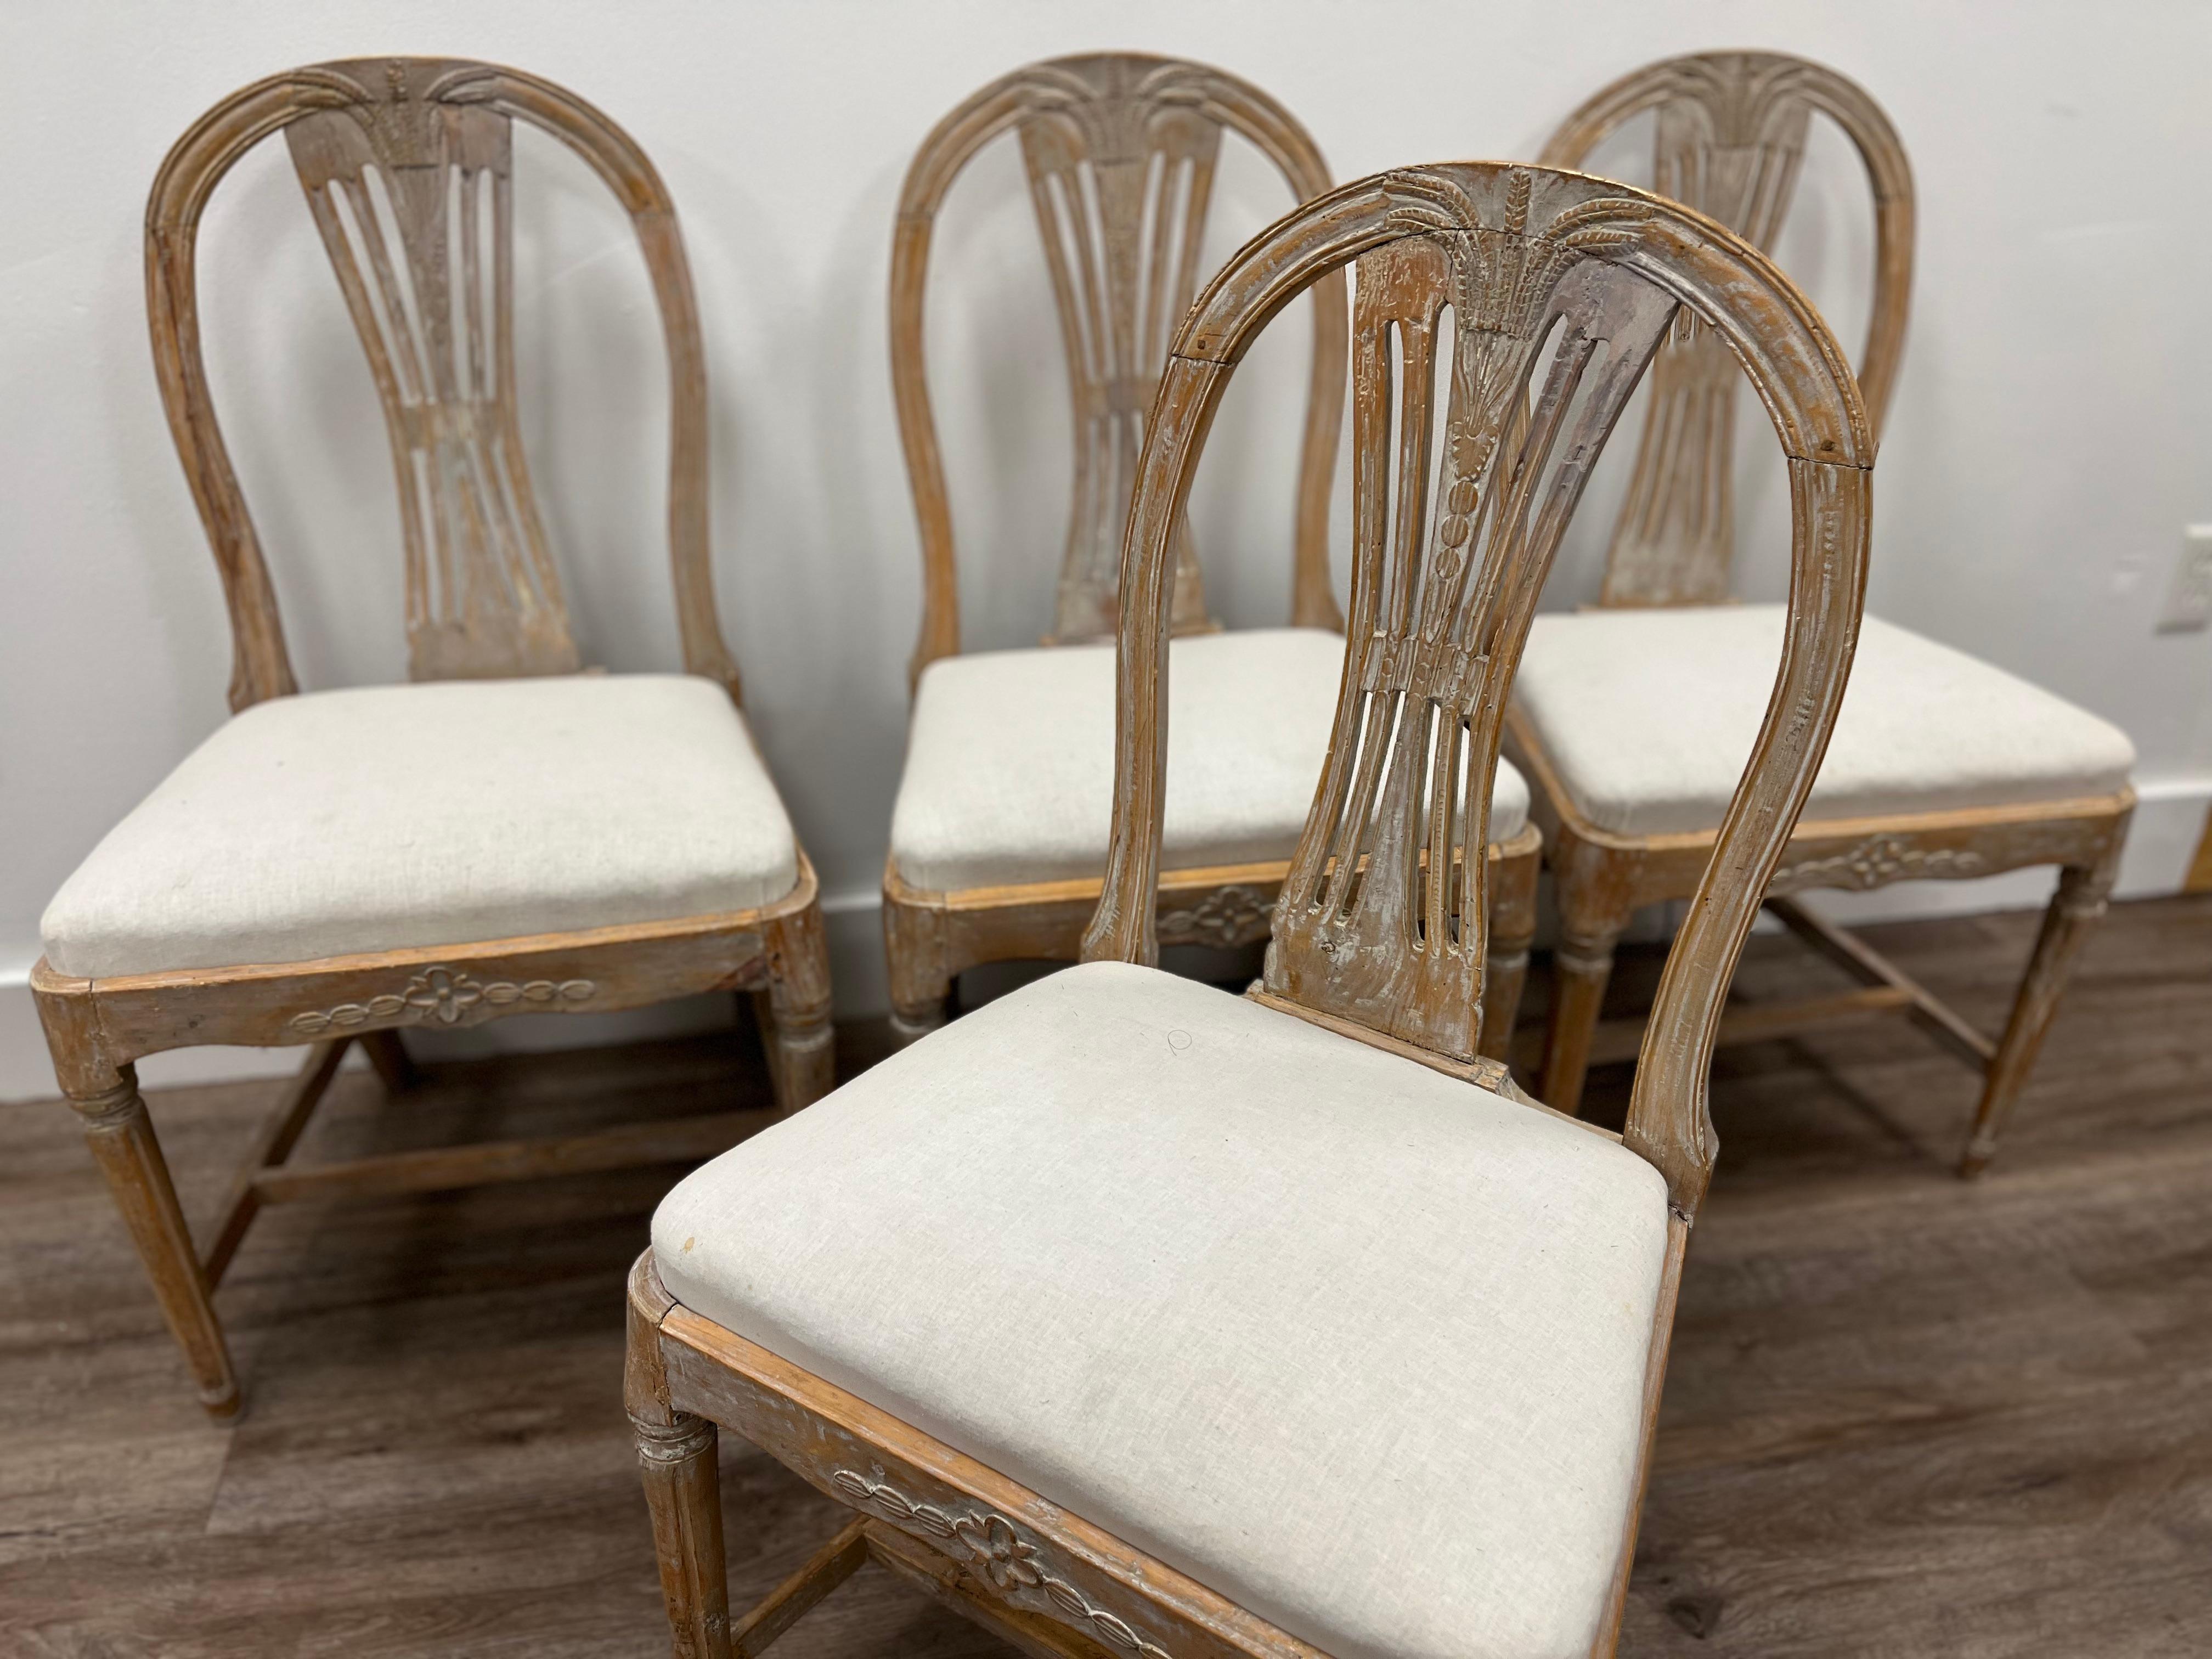 A set of four 19th century Swedish Late Gustavian Ax (also known as Vase) chairs from Lindome featuring a balloon-shaped back with five vertical, interconnected slats. In the center, five ears of wheat form a bouquet on the crest that fan outward. A